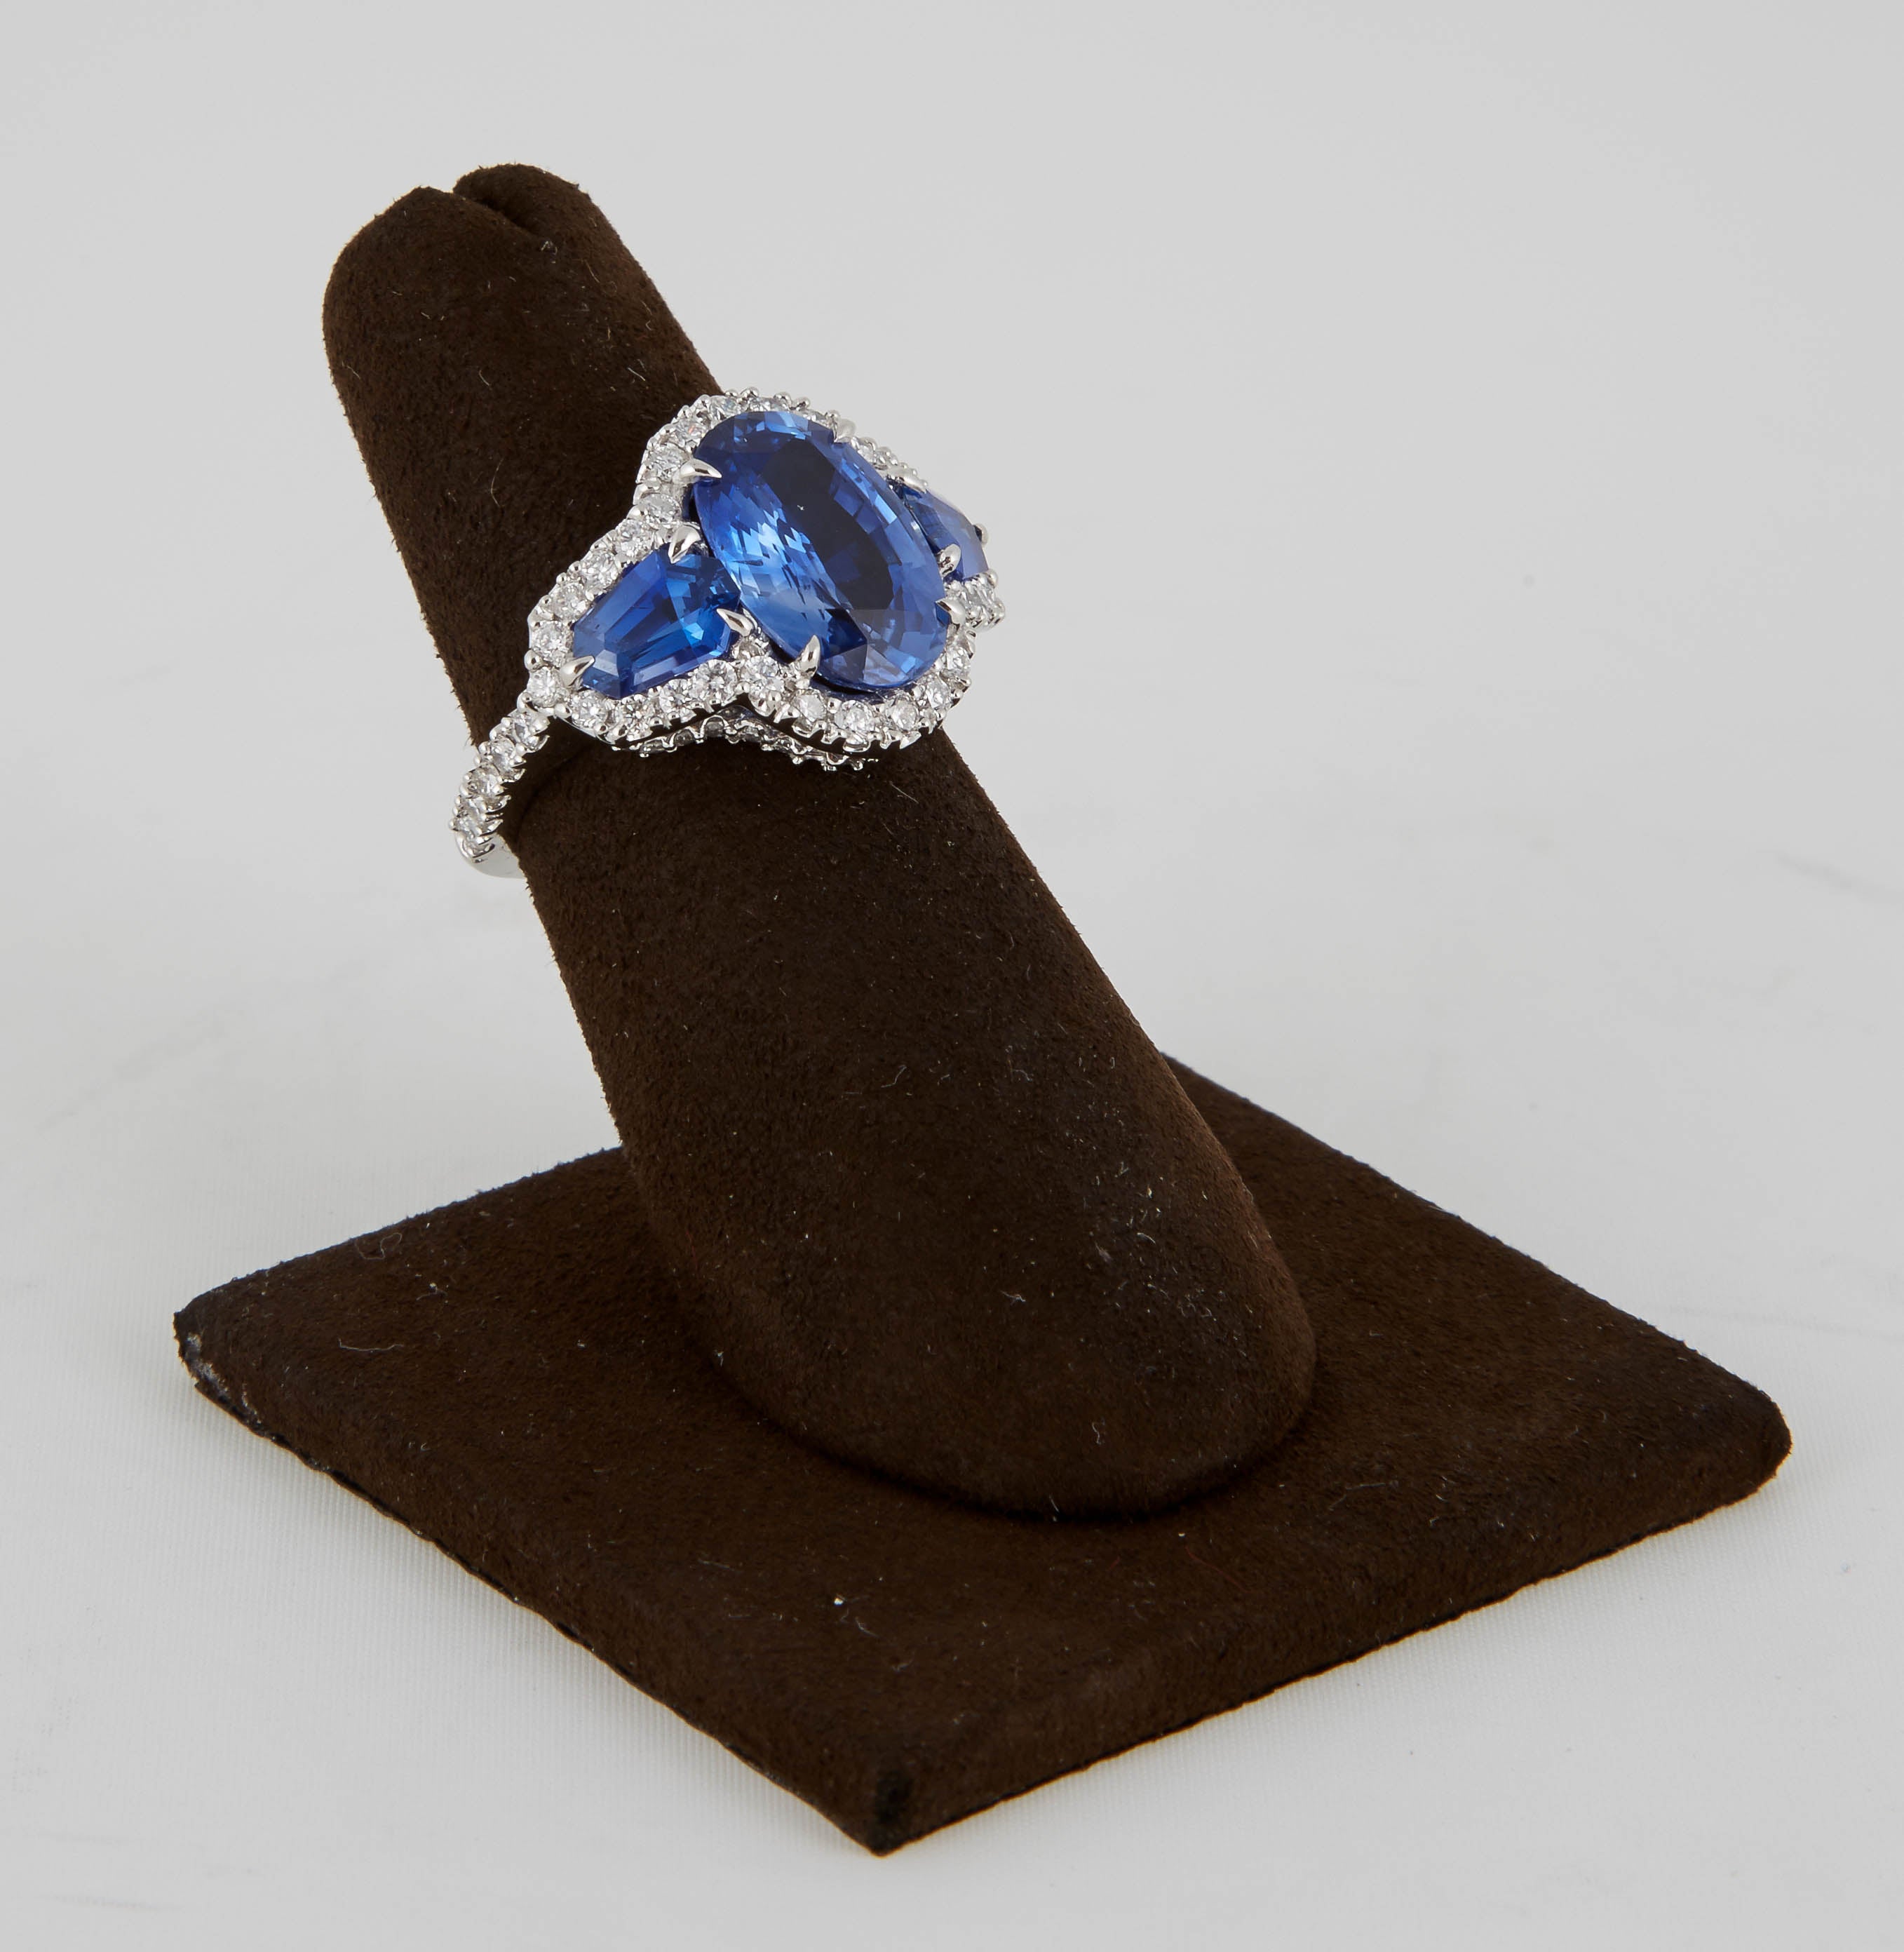 

A stunning and unique ring to add to any collection.

A beautiful 5.10 carat center oval sapphire is set with rare special cut sapphire side stones weighing 1.43 carats for a total of 6.53 carats of fine blue sapphire.

The stones are surrounded